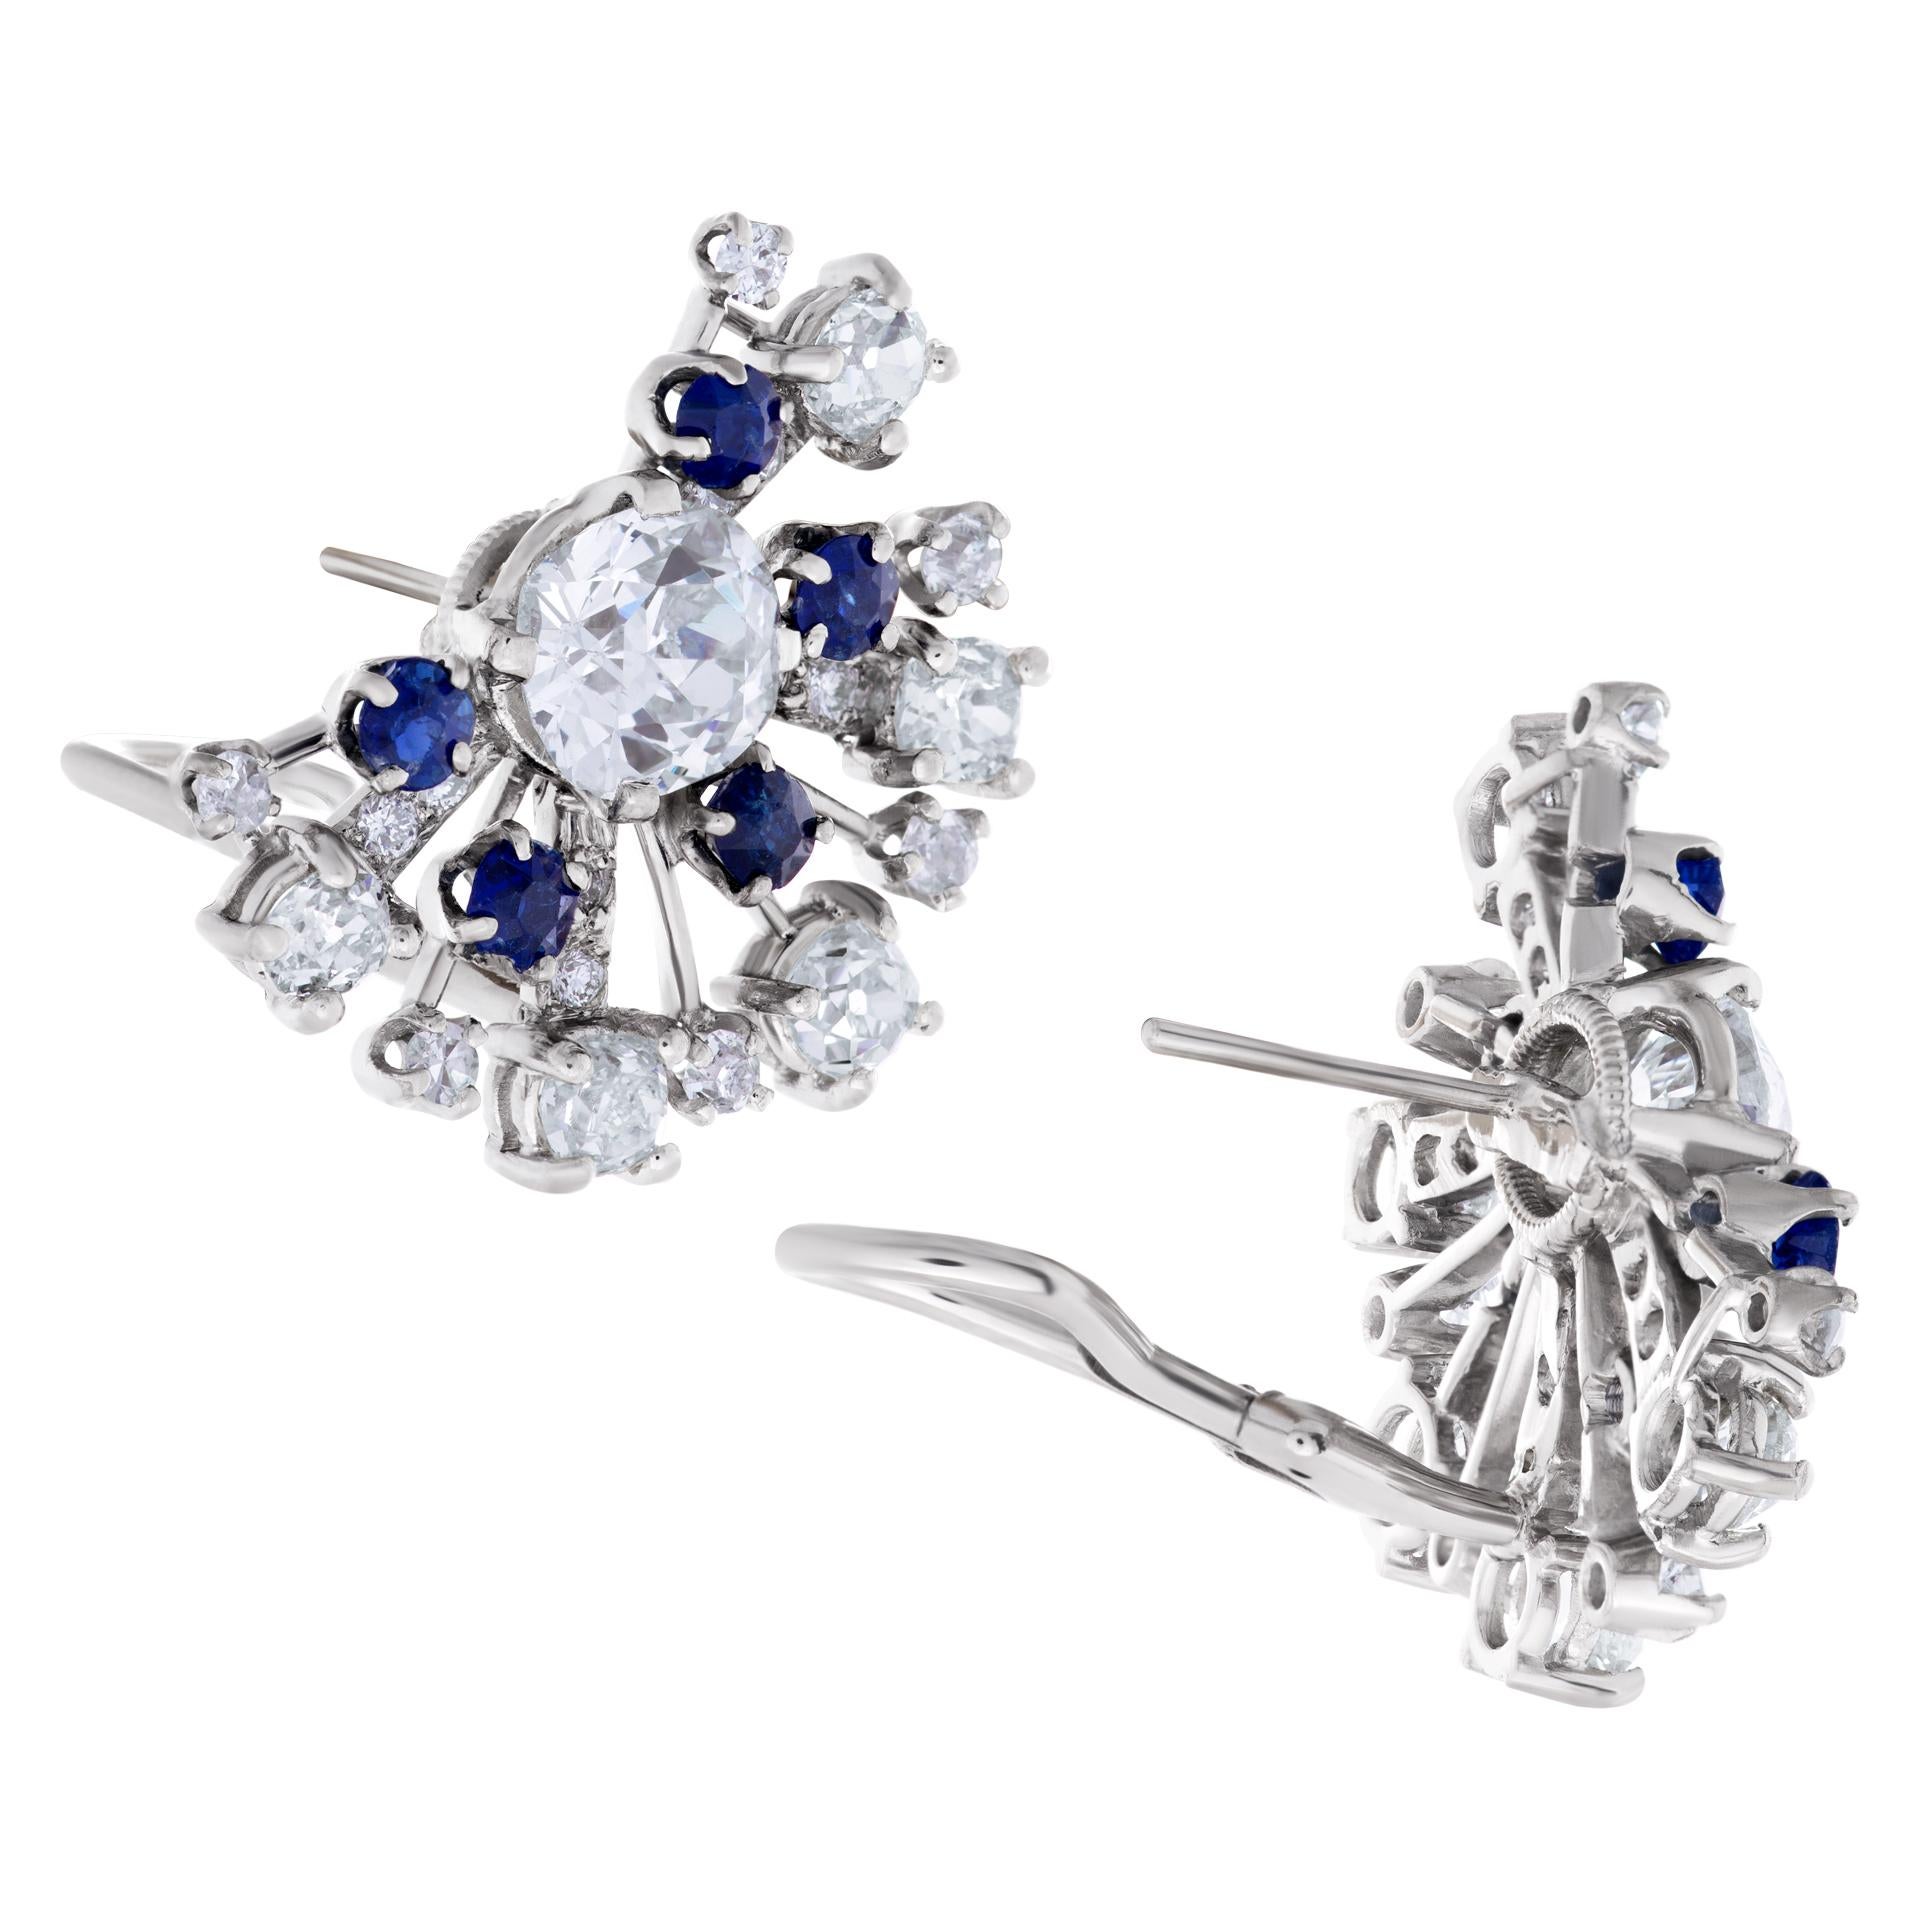 ESTIMATED RETAIL: $25,000 YOUR PRICE: $14,500 - GIA certified cushion brilliant diamonds 1.66 carats (I color, SI2 clarity) and 2.03 carat (K color, SI1 clarity) with a fanned earring with round diamonds and blue sapphires in platinum. Width: 1'',